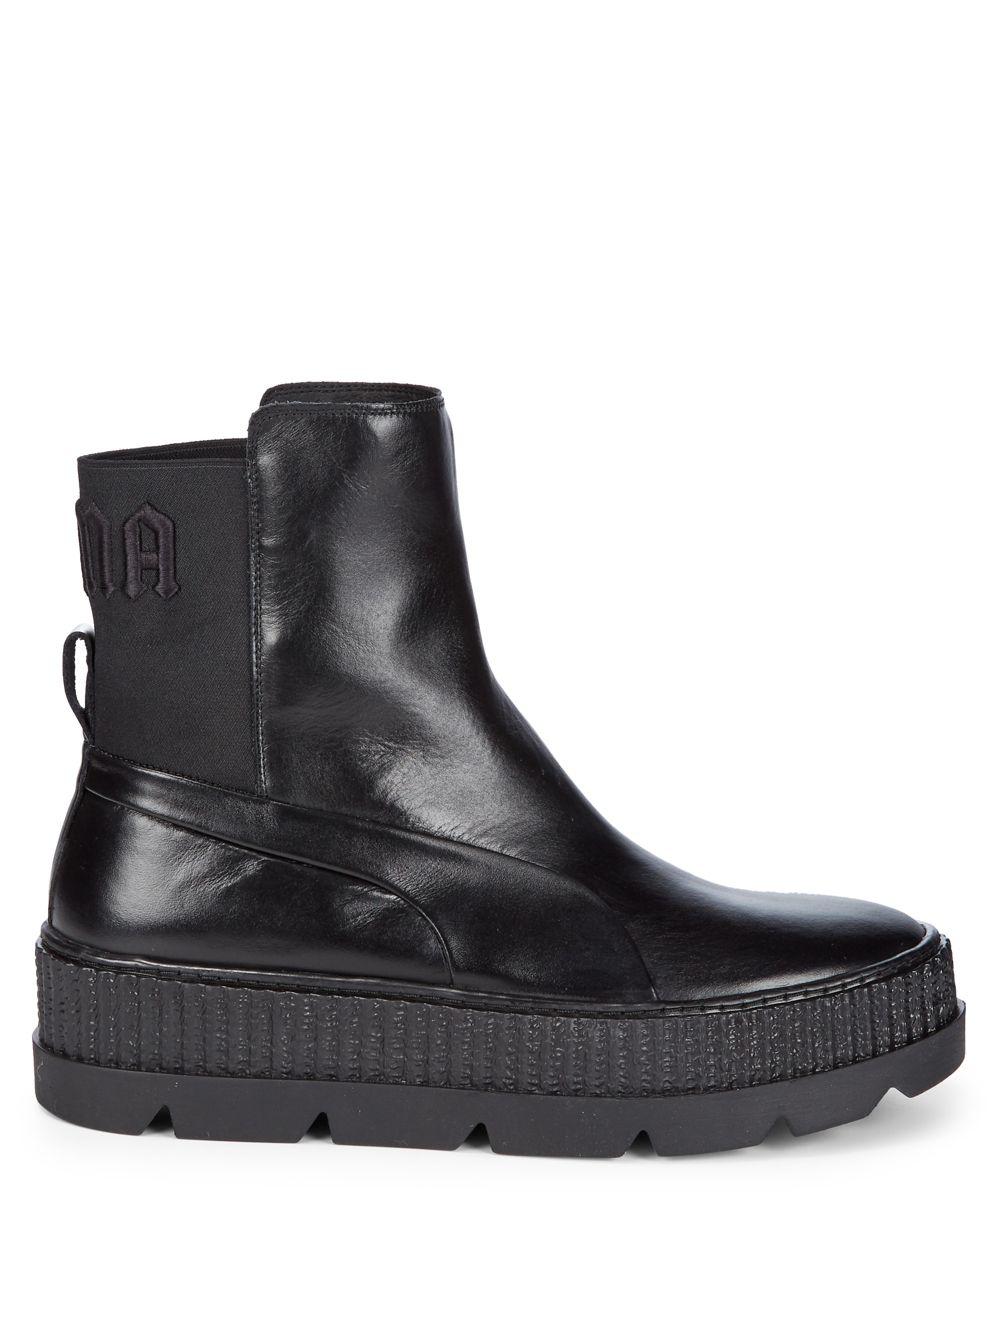 PUMA Fenty X Leather Ankle Boots in Black for Men - Lyst